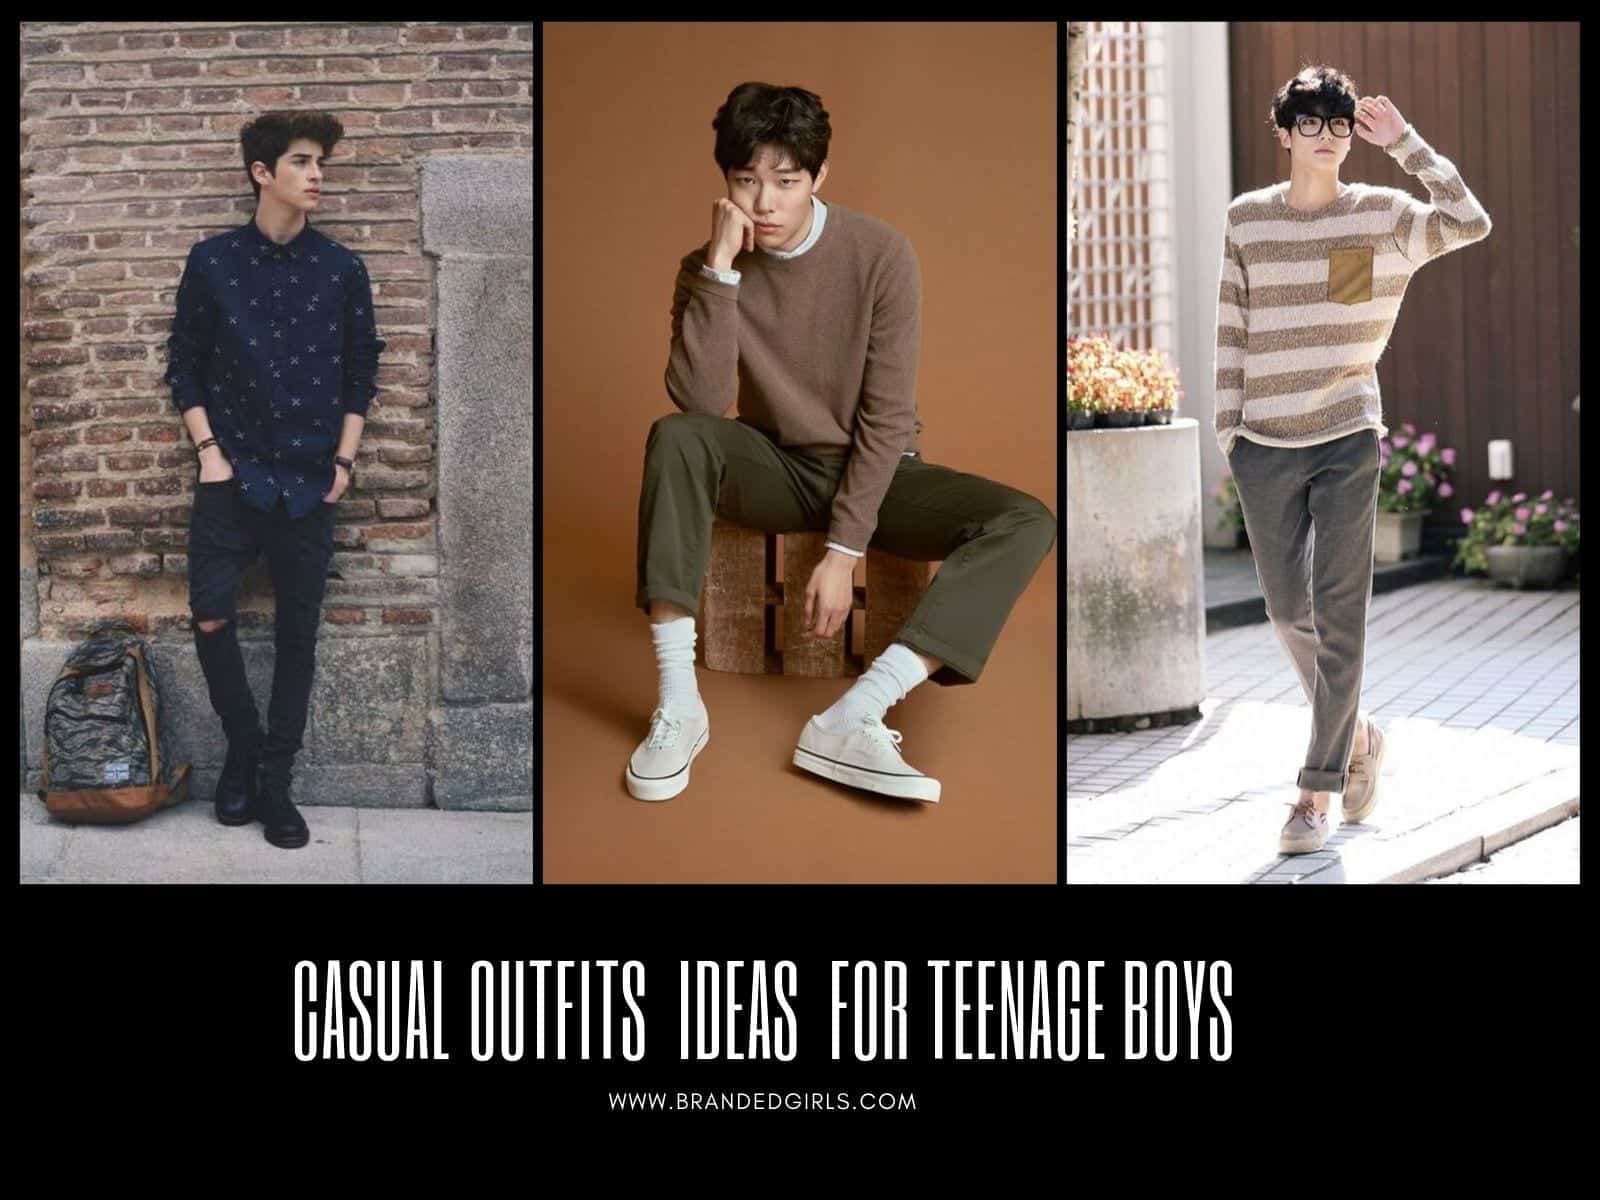 Casual Outfits Ideas for Teenage Boys